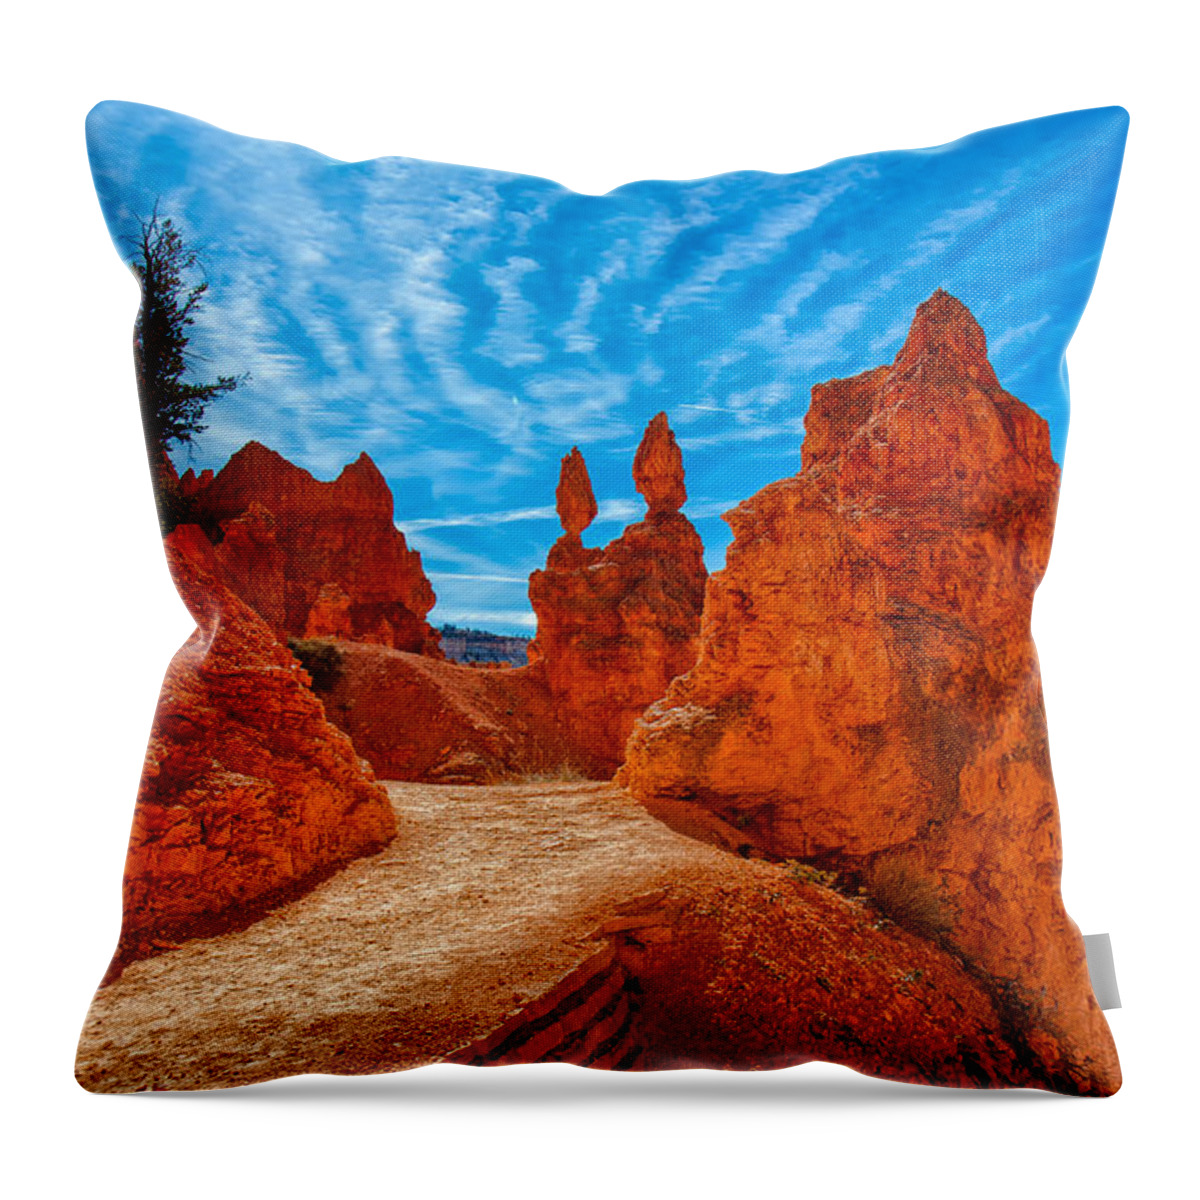 Landscape Throw Pillow featuring the photograph Passages by John M Bailey